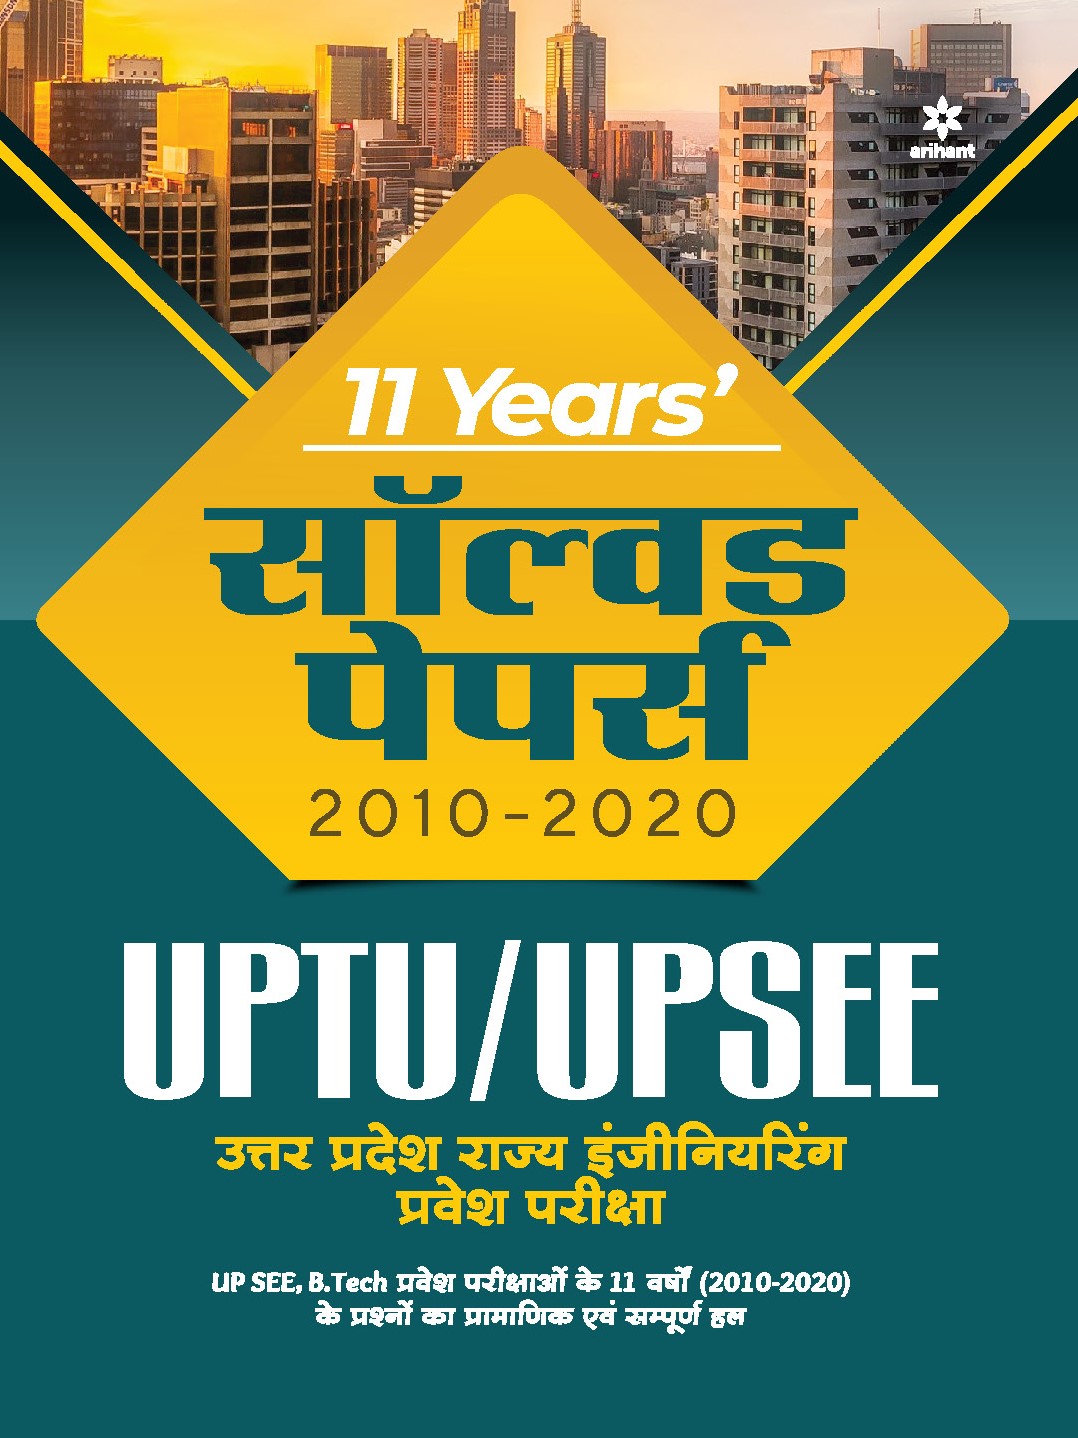 11 Years Solved Papers UPTU/ UP SEE (Hindi) 2021